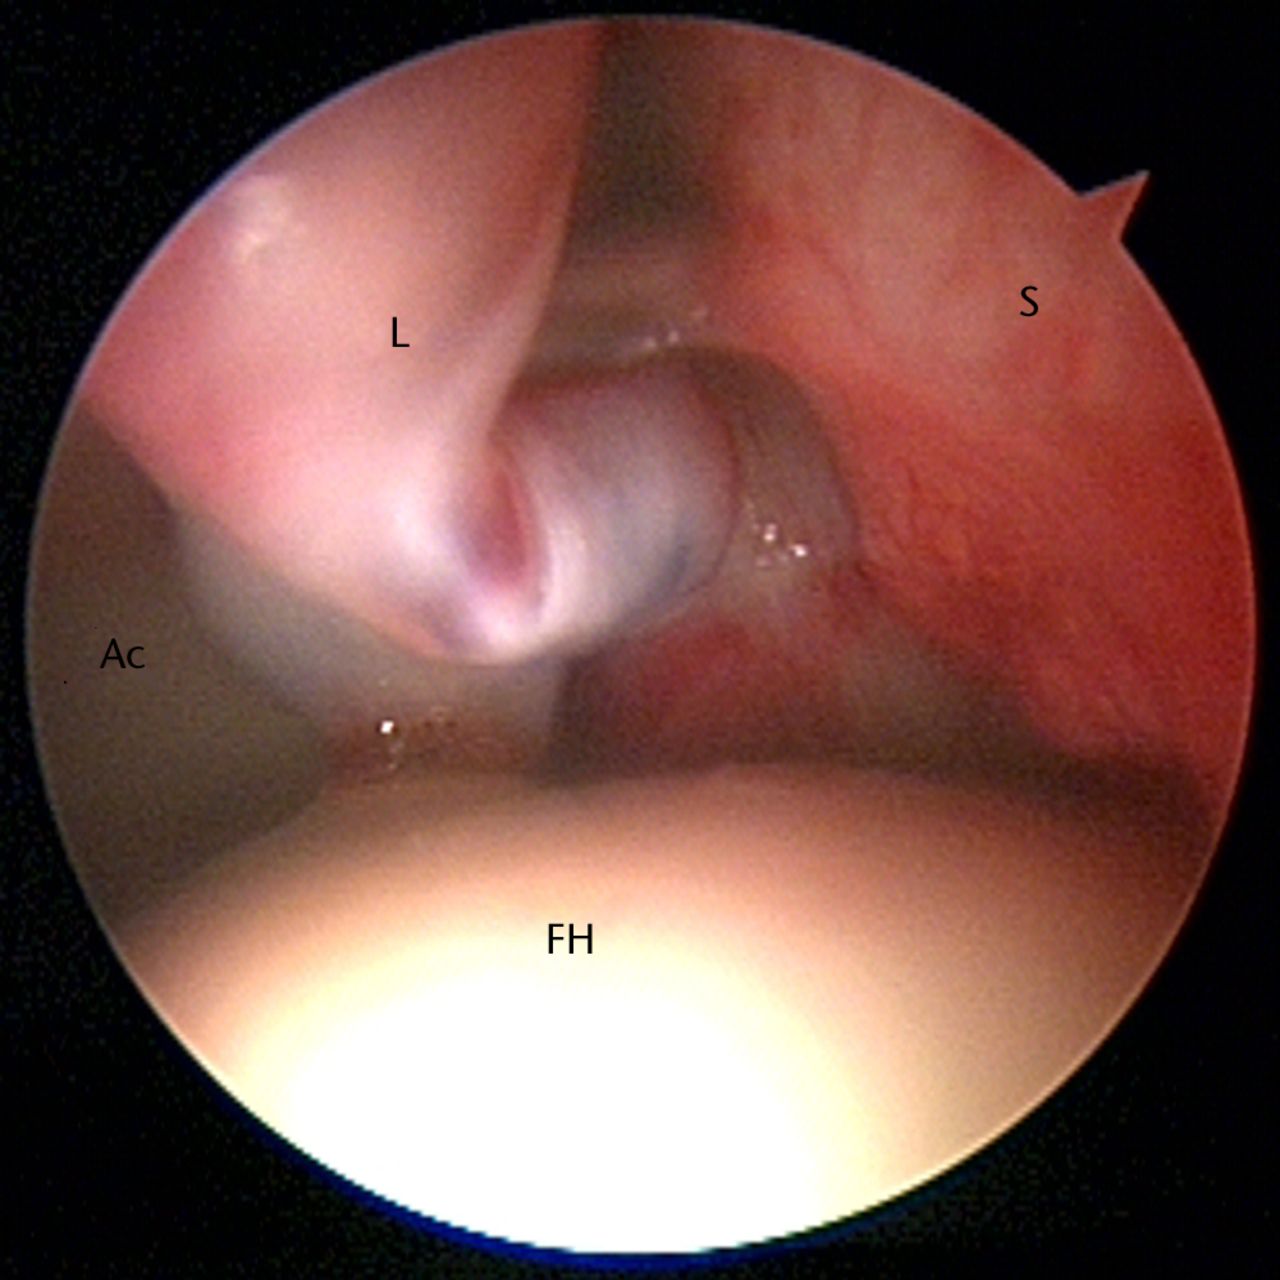 Fig. 6 
            Arthroscopic image showing chondrolabral
damage occurring as a result of pincer impingement. The labrum (L)
is bruised and hypertrophied, with adjacent synovitis (S). Cartilage
damage occurs on the femoral side in a linear wear pattern (FH,
femoral head; Ac, acetabulum).
          